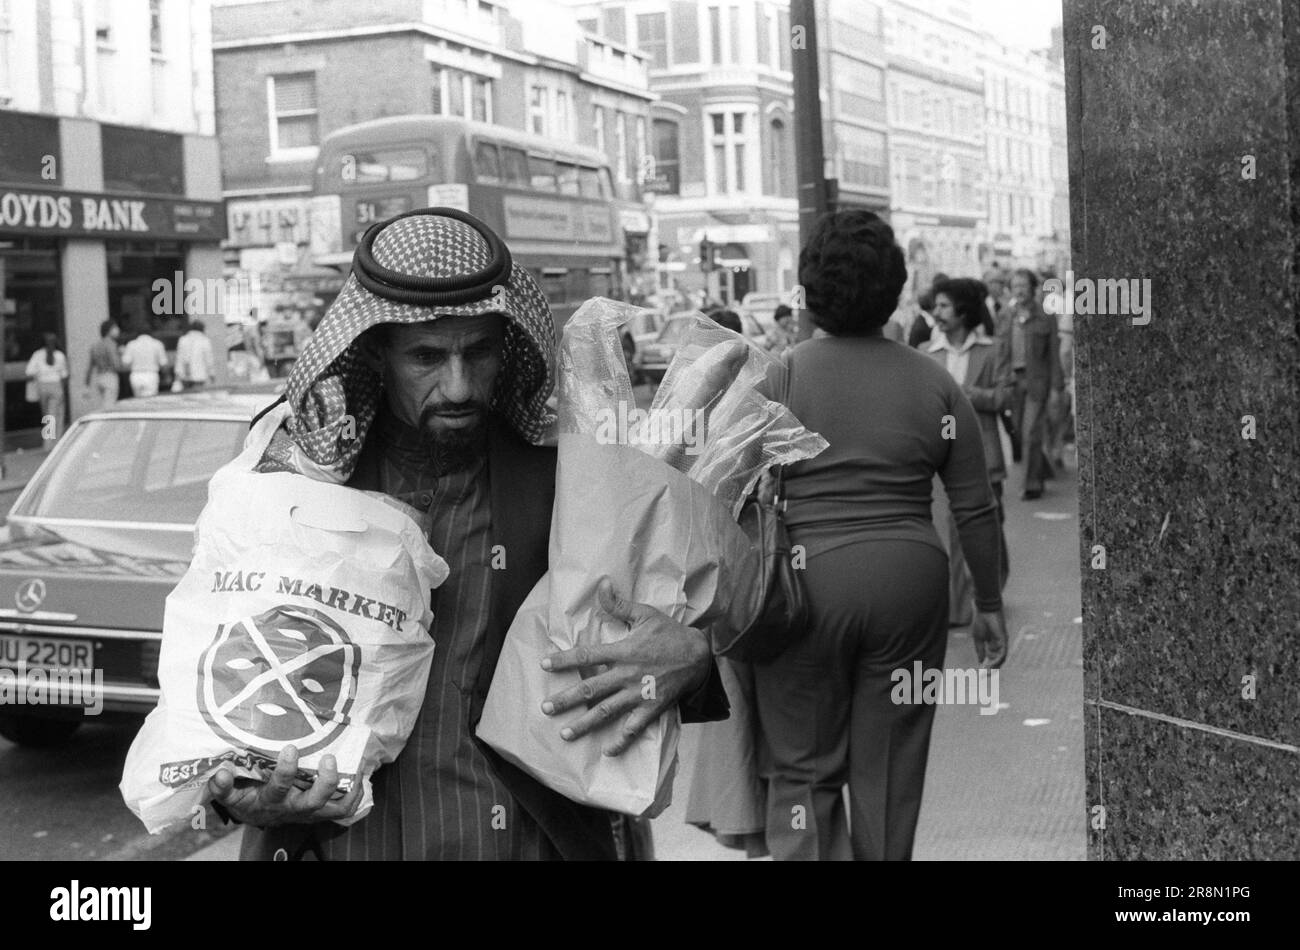 Poor Arabs in London Shopping for Groceries. During the late 1970s Middle Eastern governments provided healthcare for their nationals in London, many stayed in bedsit cheap accommodation in the Earls Court area. An Arab man carries out two shopping bags of groceries. Earls Court, London, England circa 1977 70s UK HOMER SYKES Stock Photo